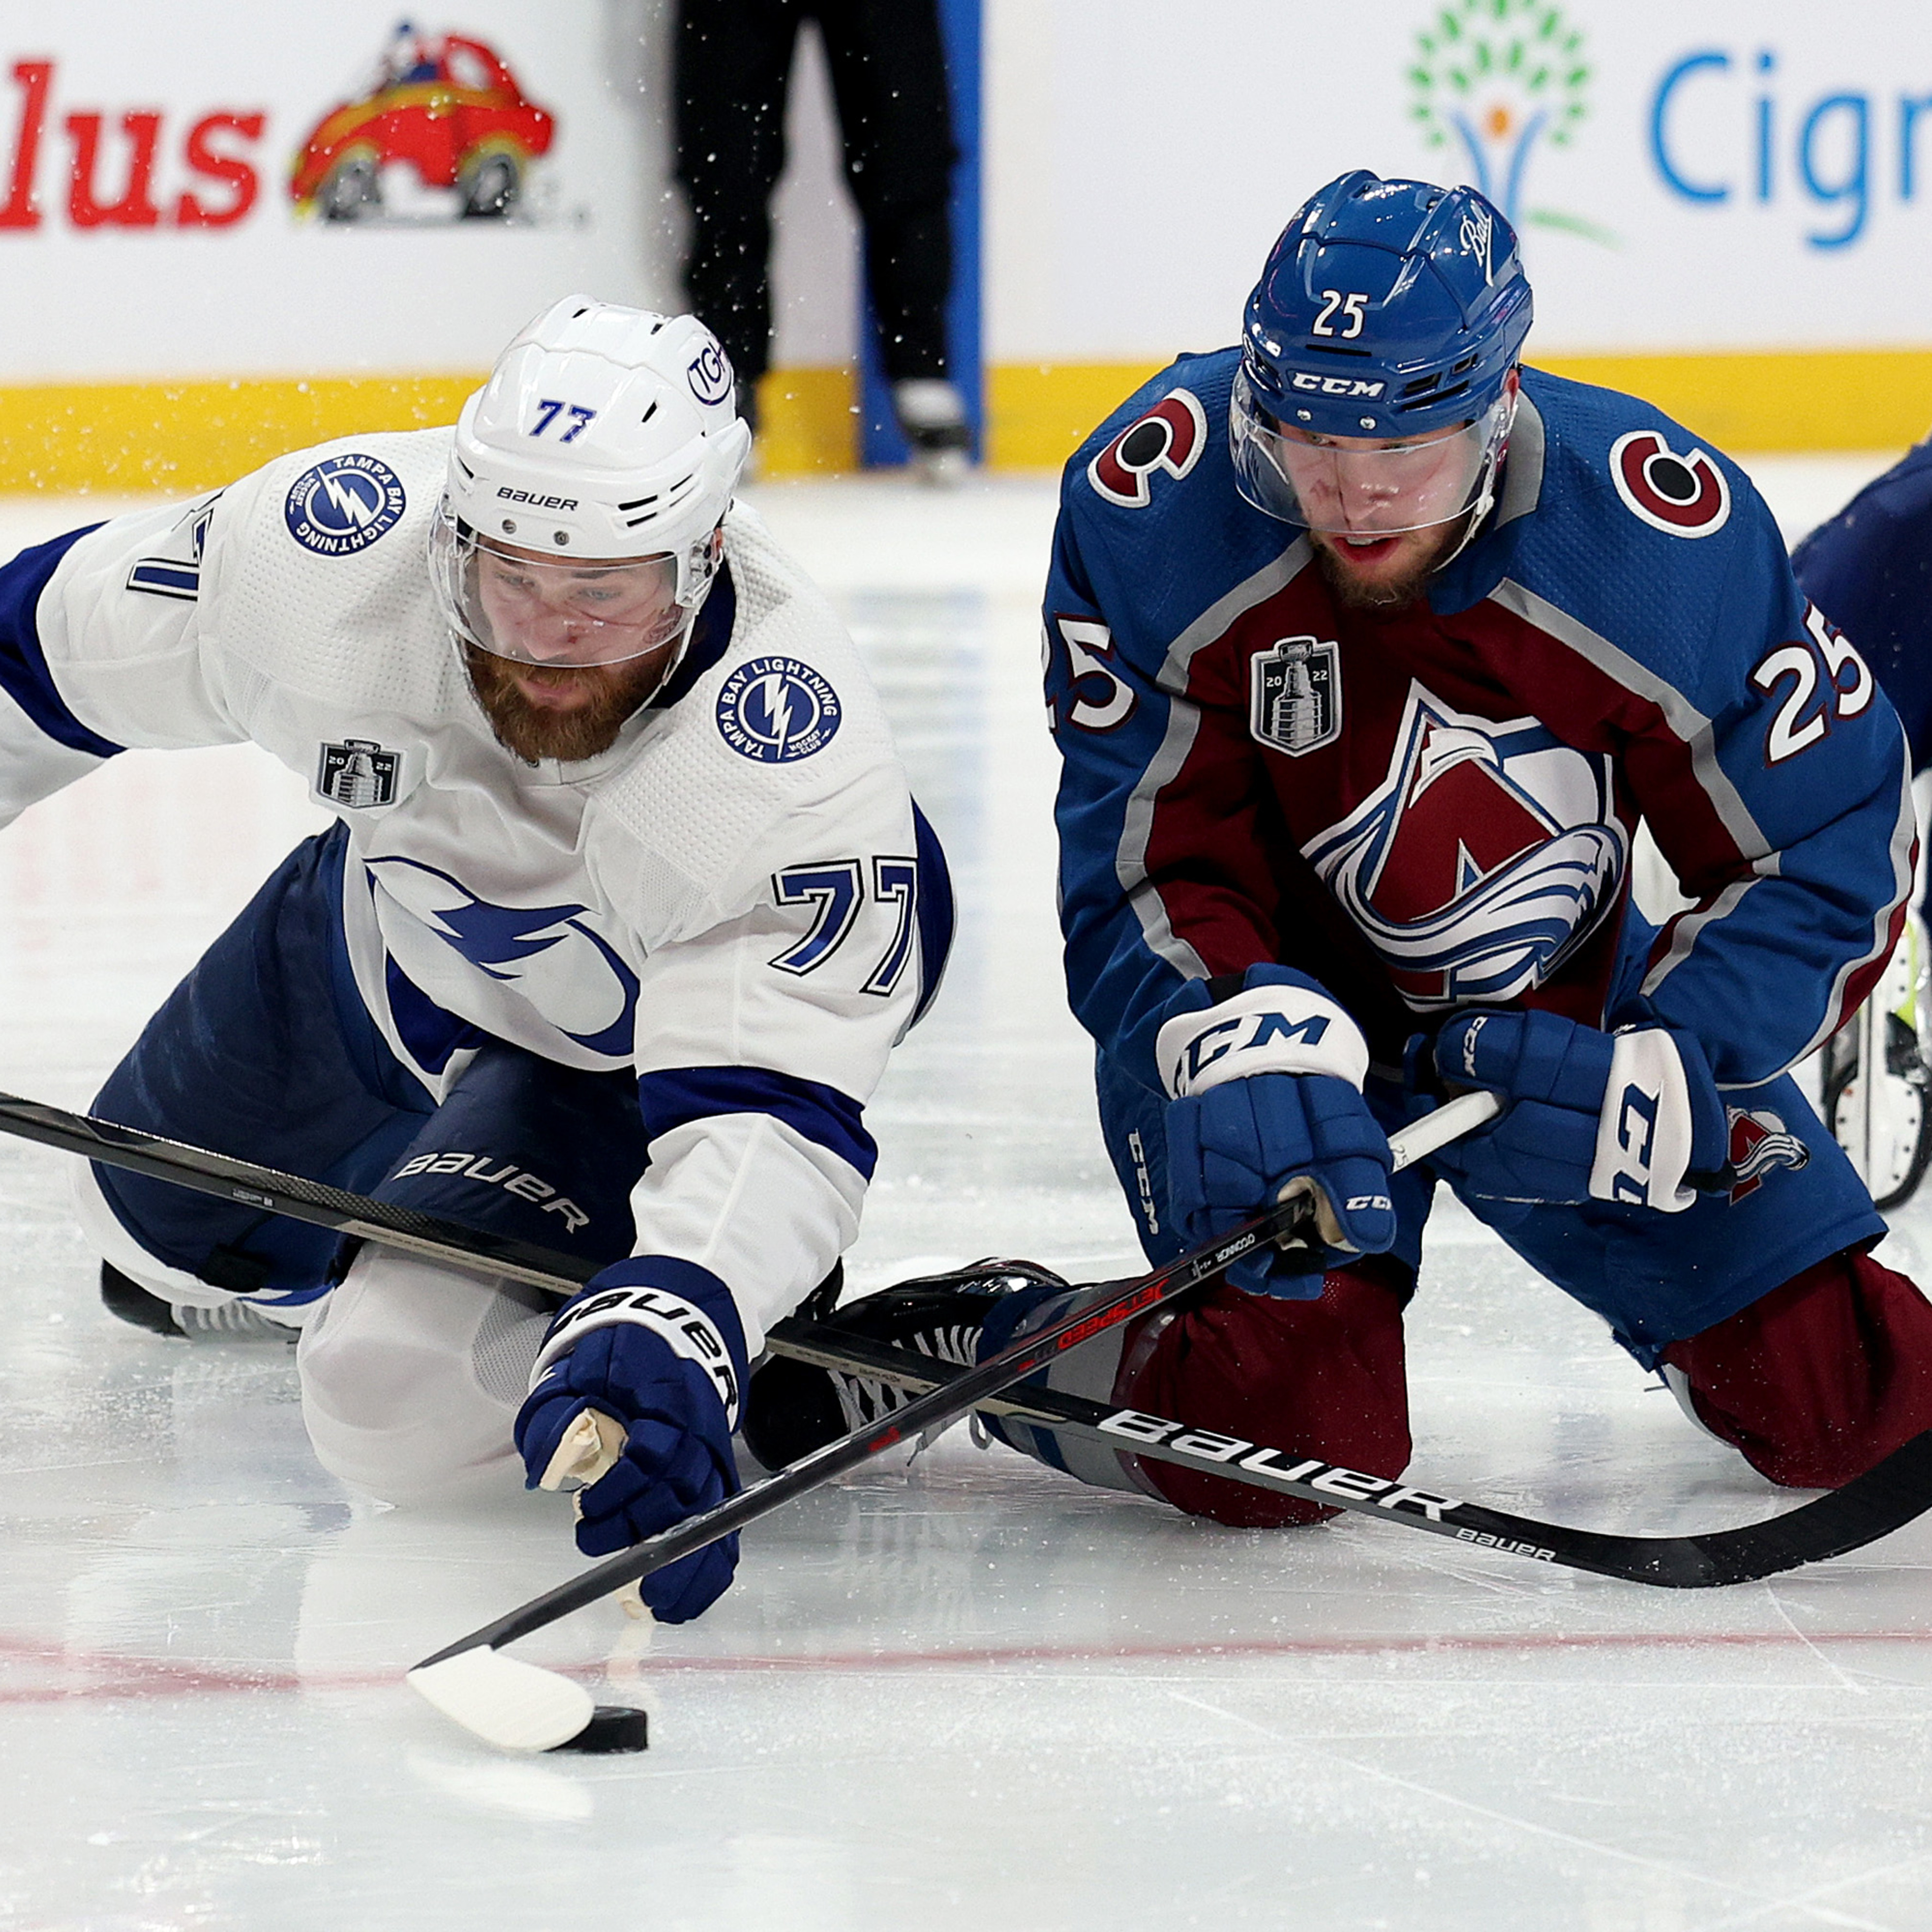 Lightning Mocked by NHL Twitter After Blowout Loss to Avalanche in Game 2